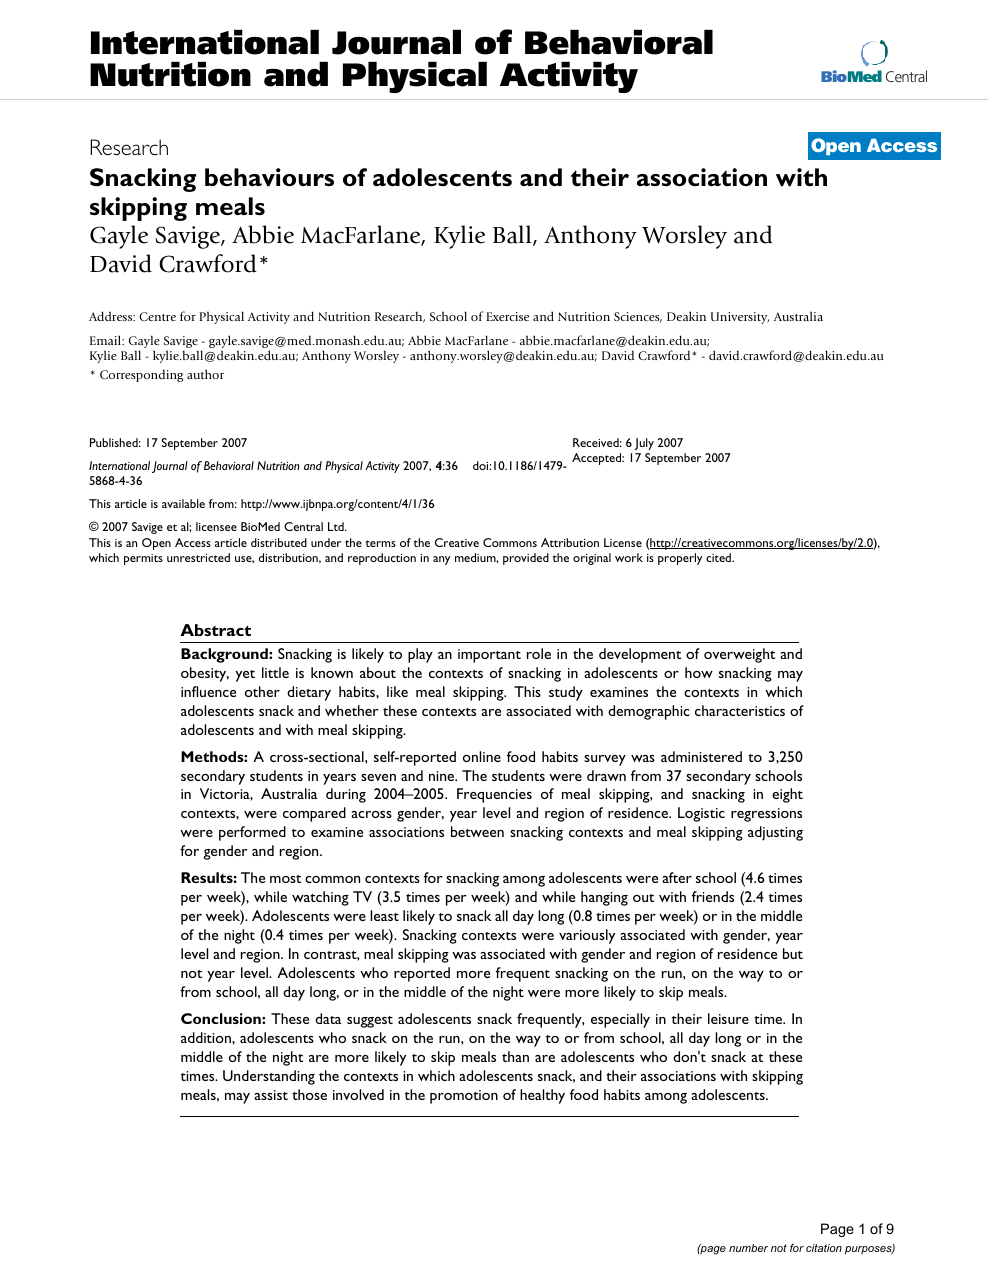 Snacking Behaviours Of Adolescents And Their Association With Skipping Meals Topic Of Research Paper In Health Sciences Download Scholarly Article Pdf And Read For Free On Cyberleninka Open Science Hub